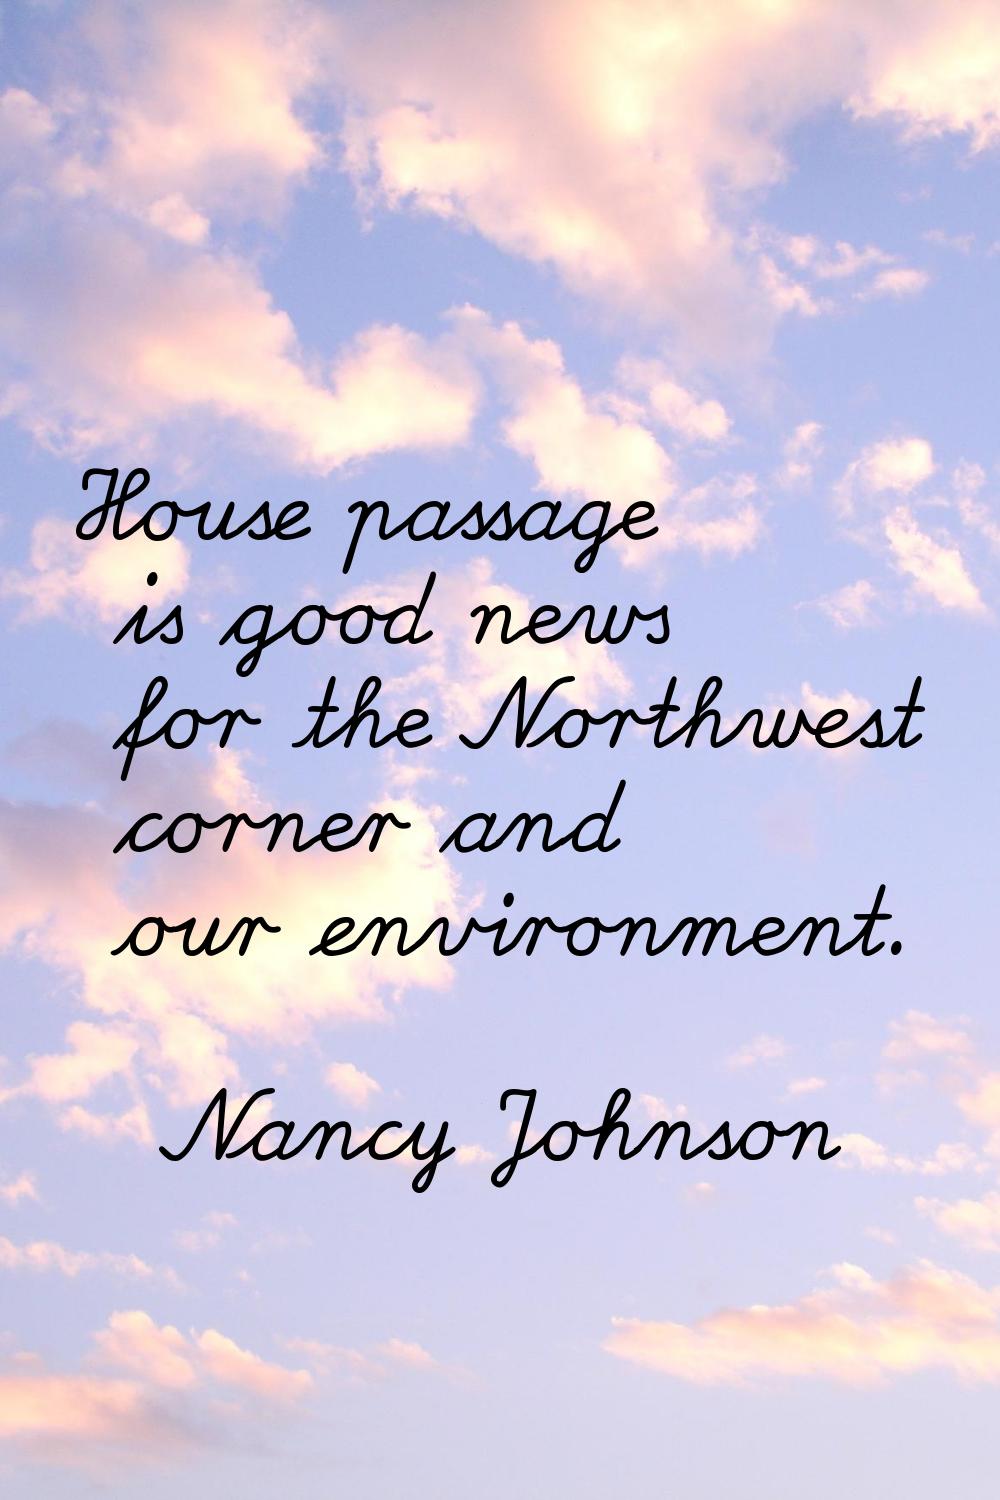 House passage is good news for the Northwest corner and our environment.